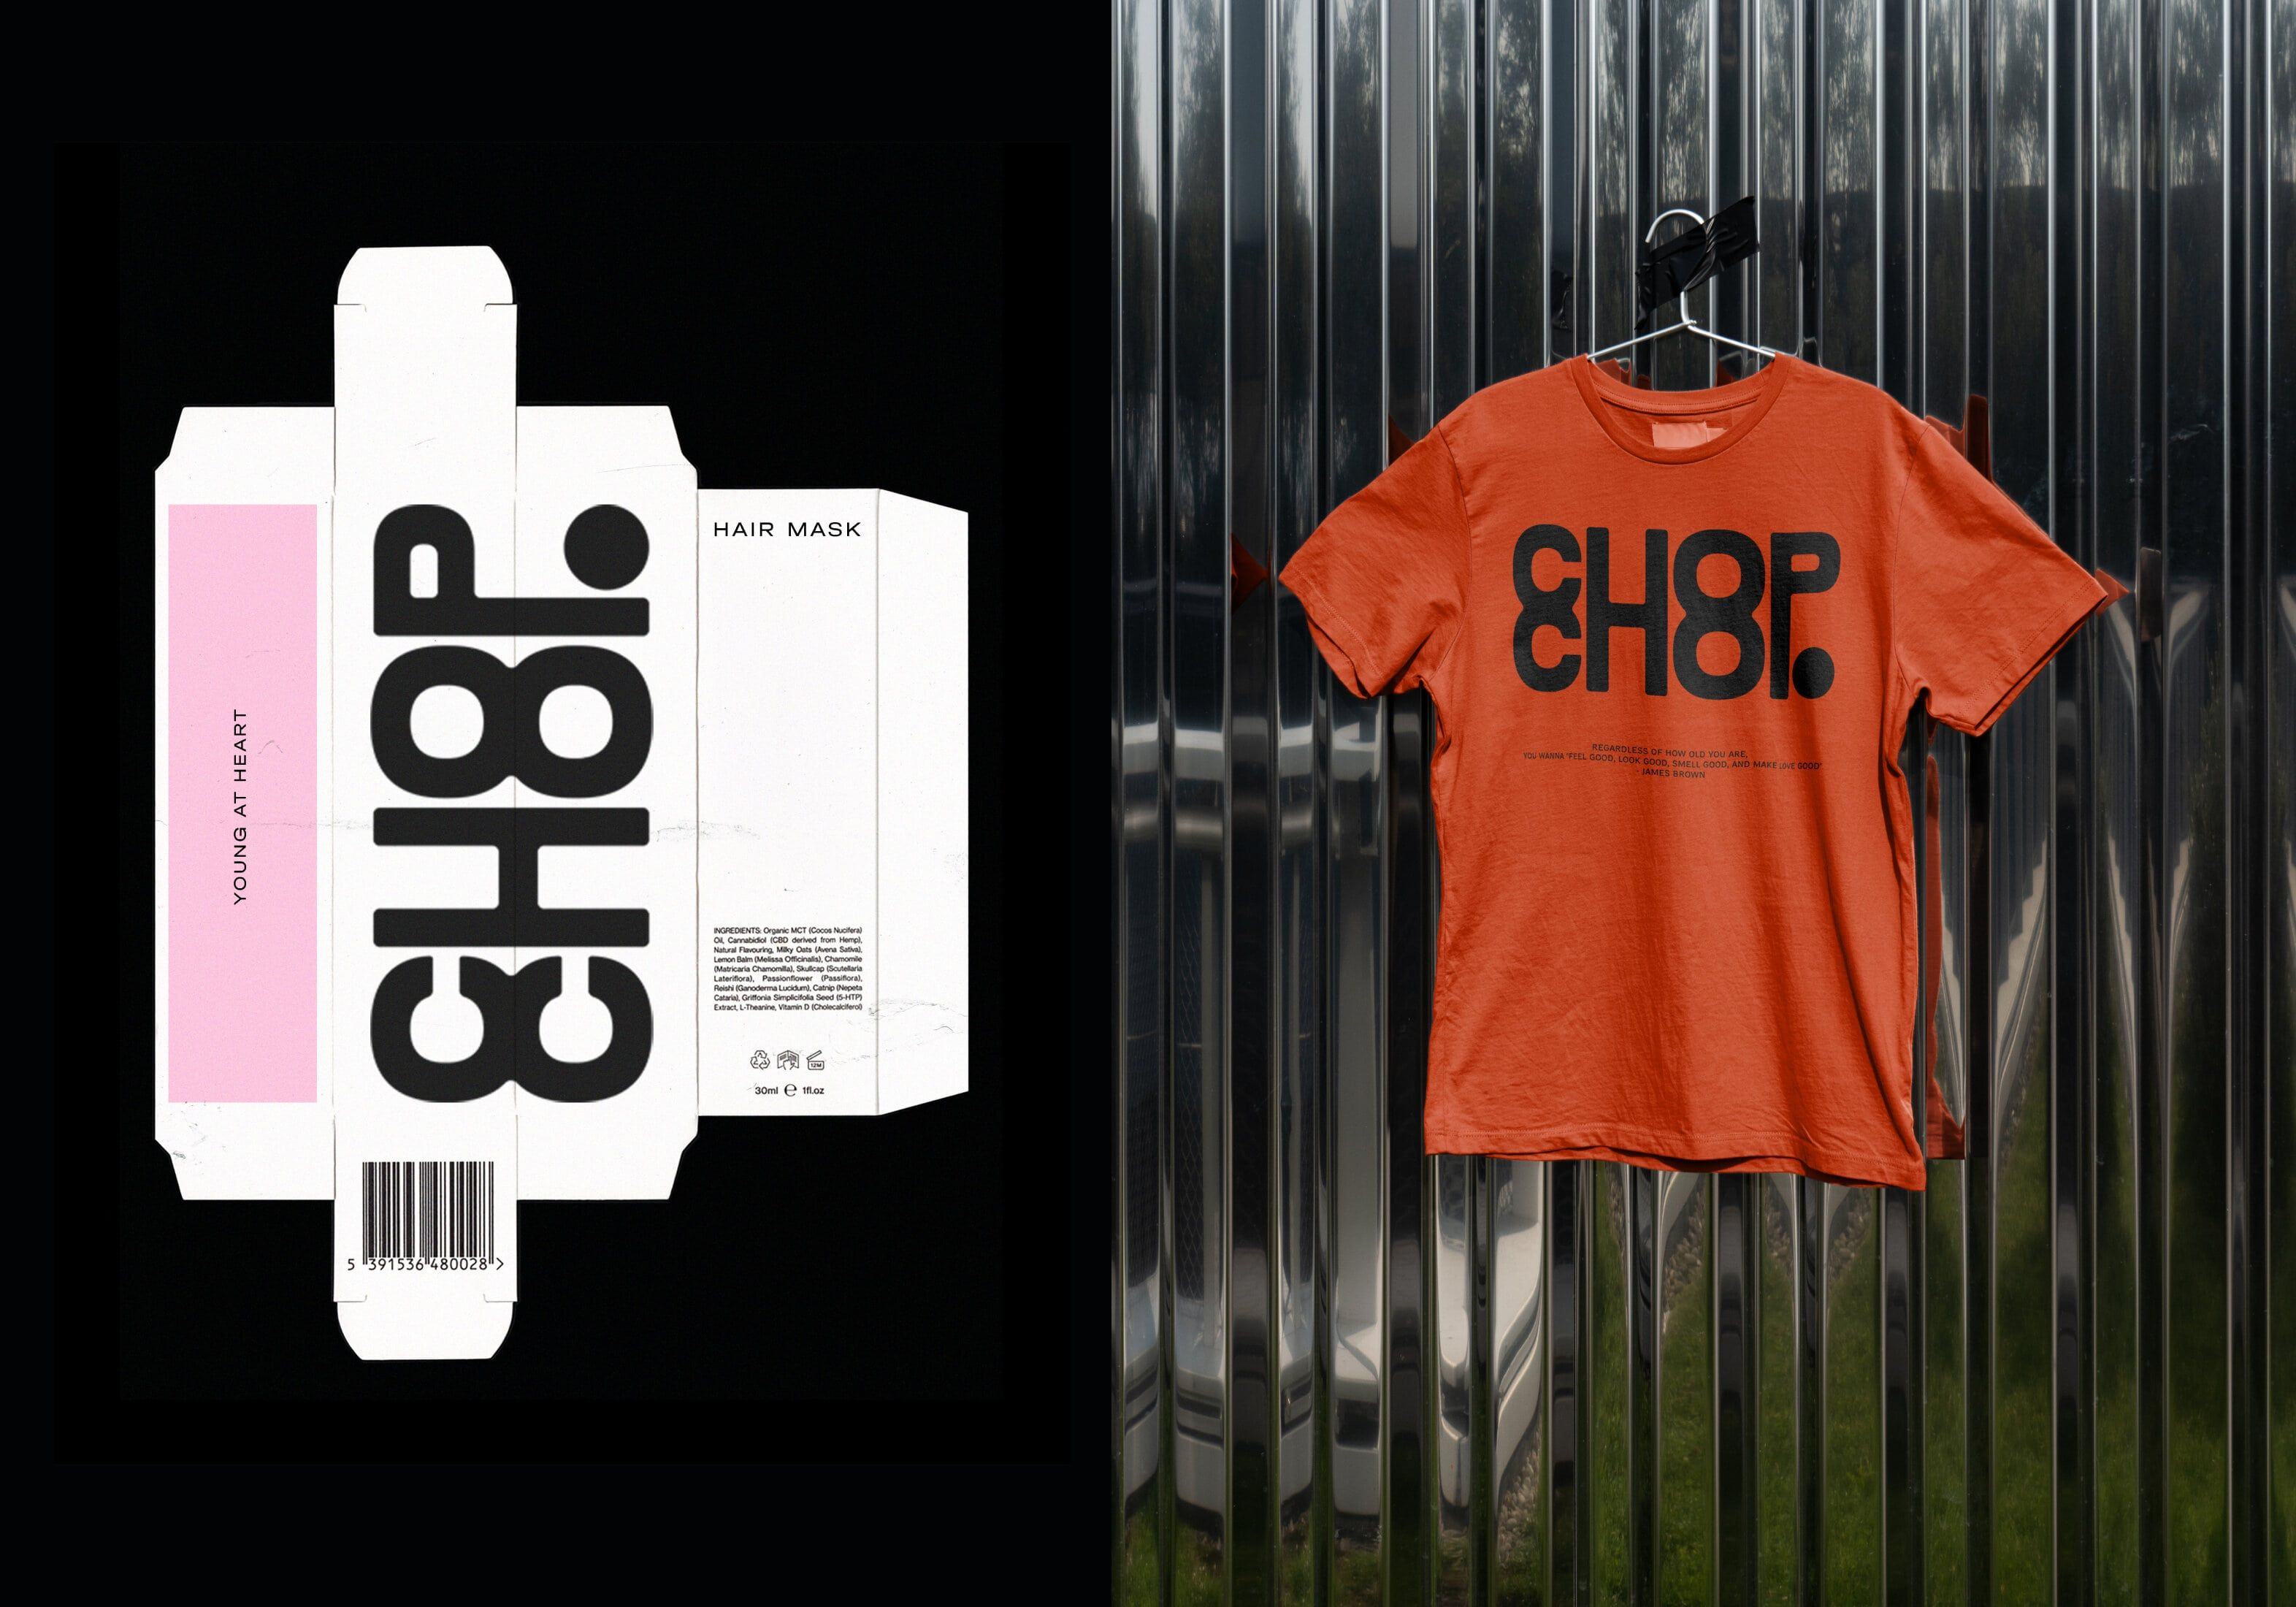 Chop Chop package and t-shirt